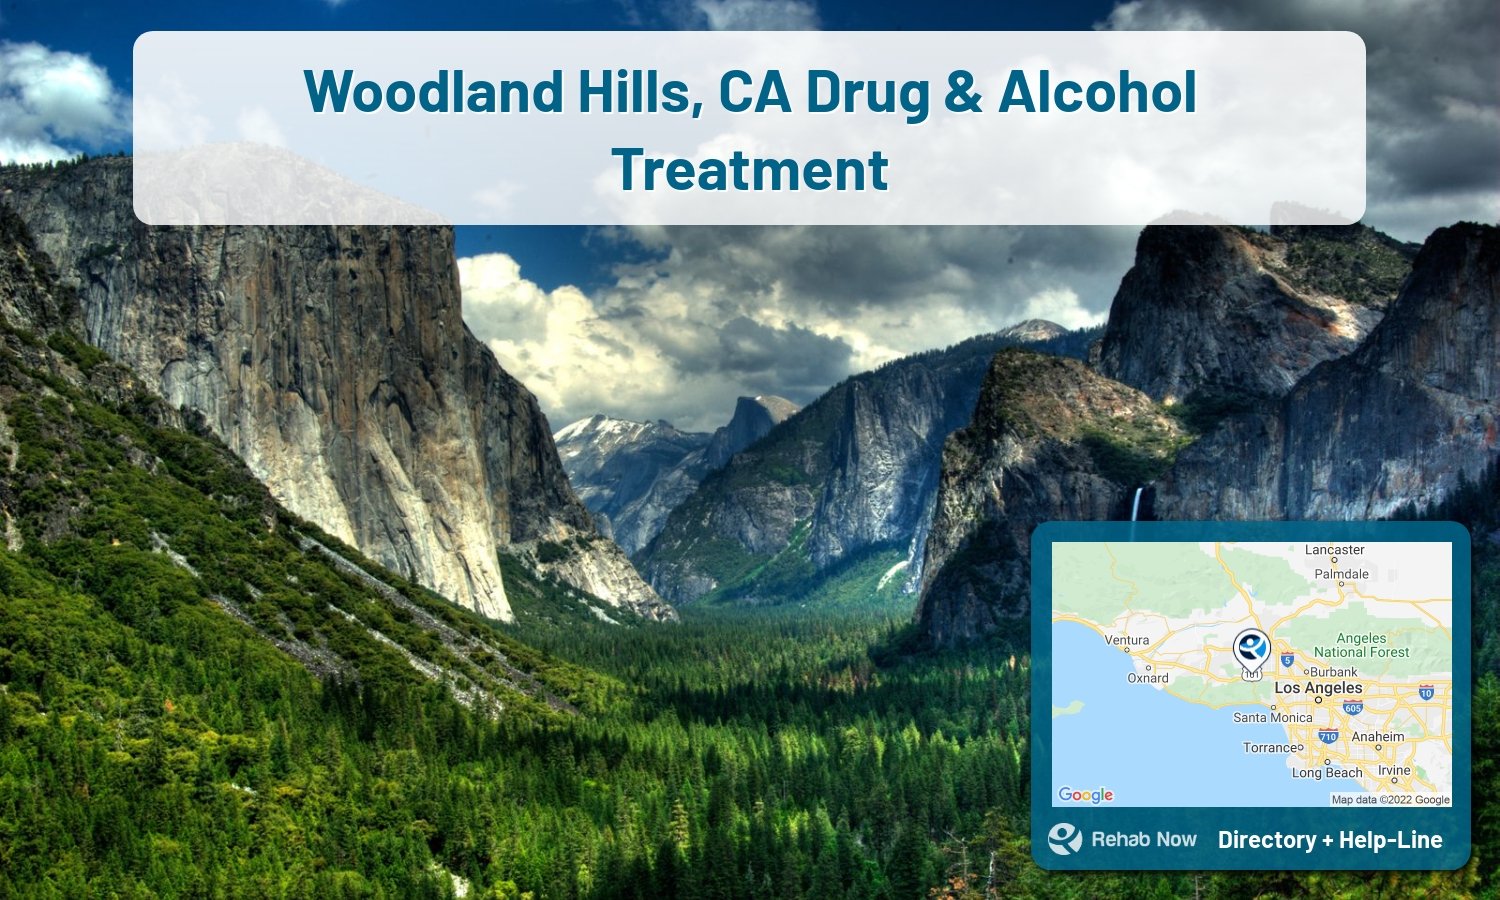 List of alcohol and drug treatment centers near you in Woodland Hills, California. Research certifications, programs, methods, pricing, and more.